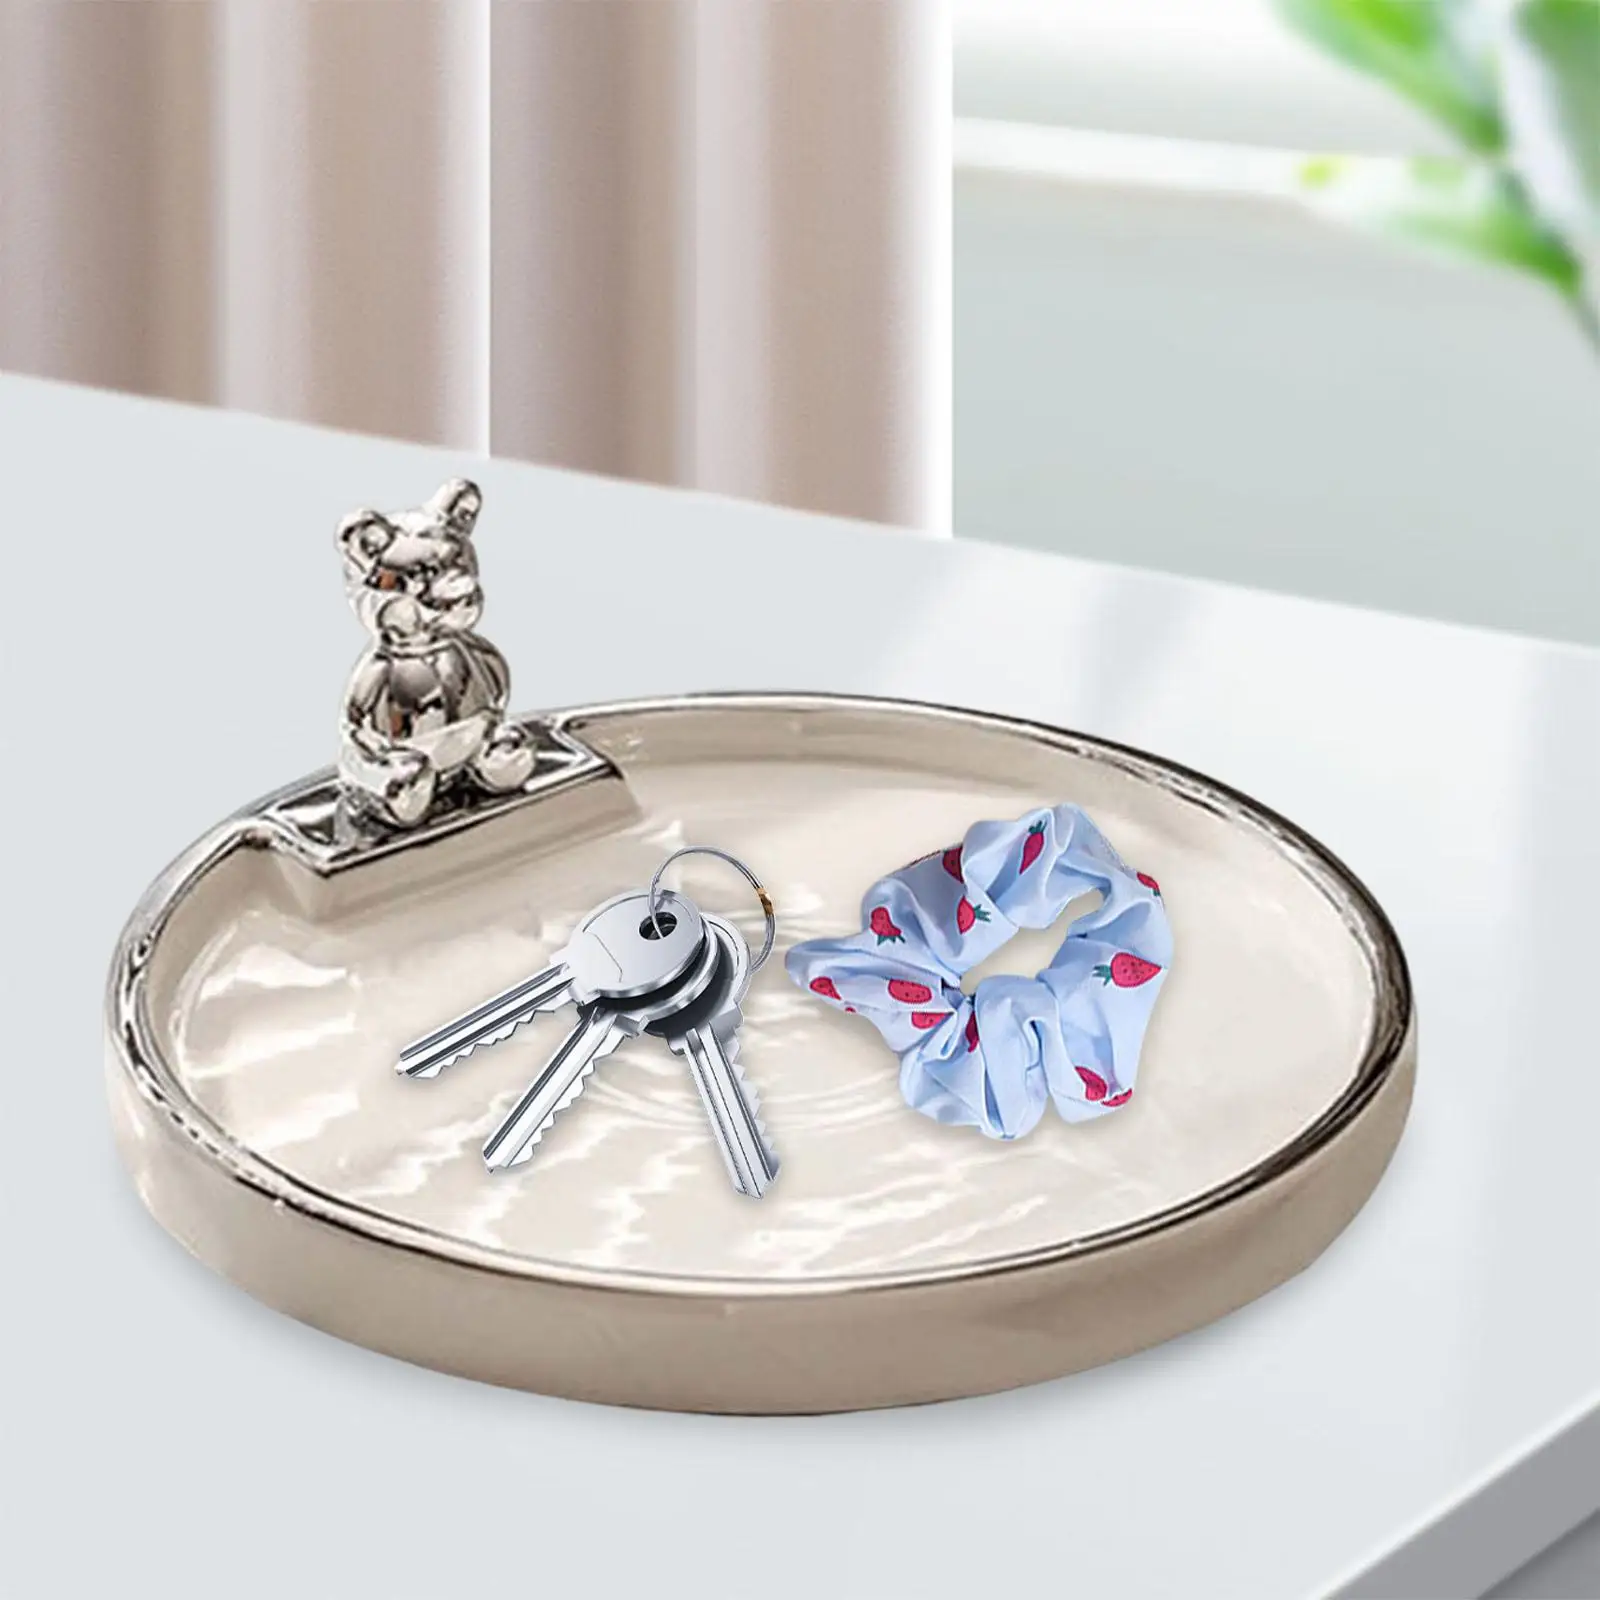 Perfume Candle Tray Decorative Tray for Cabinet Linen Closet Bedside Table